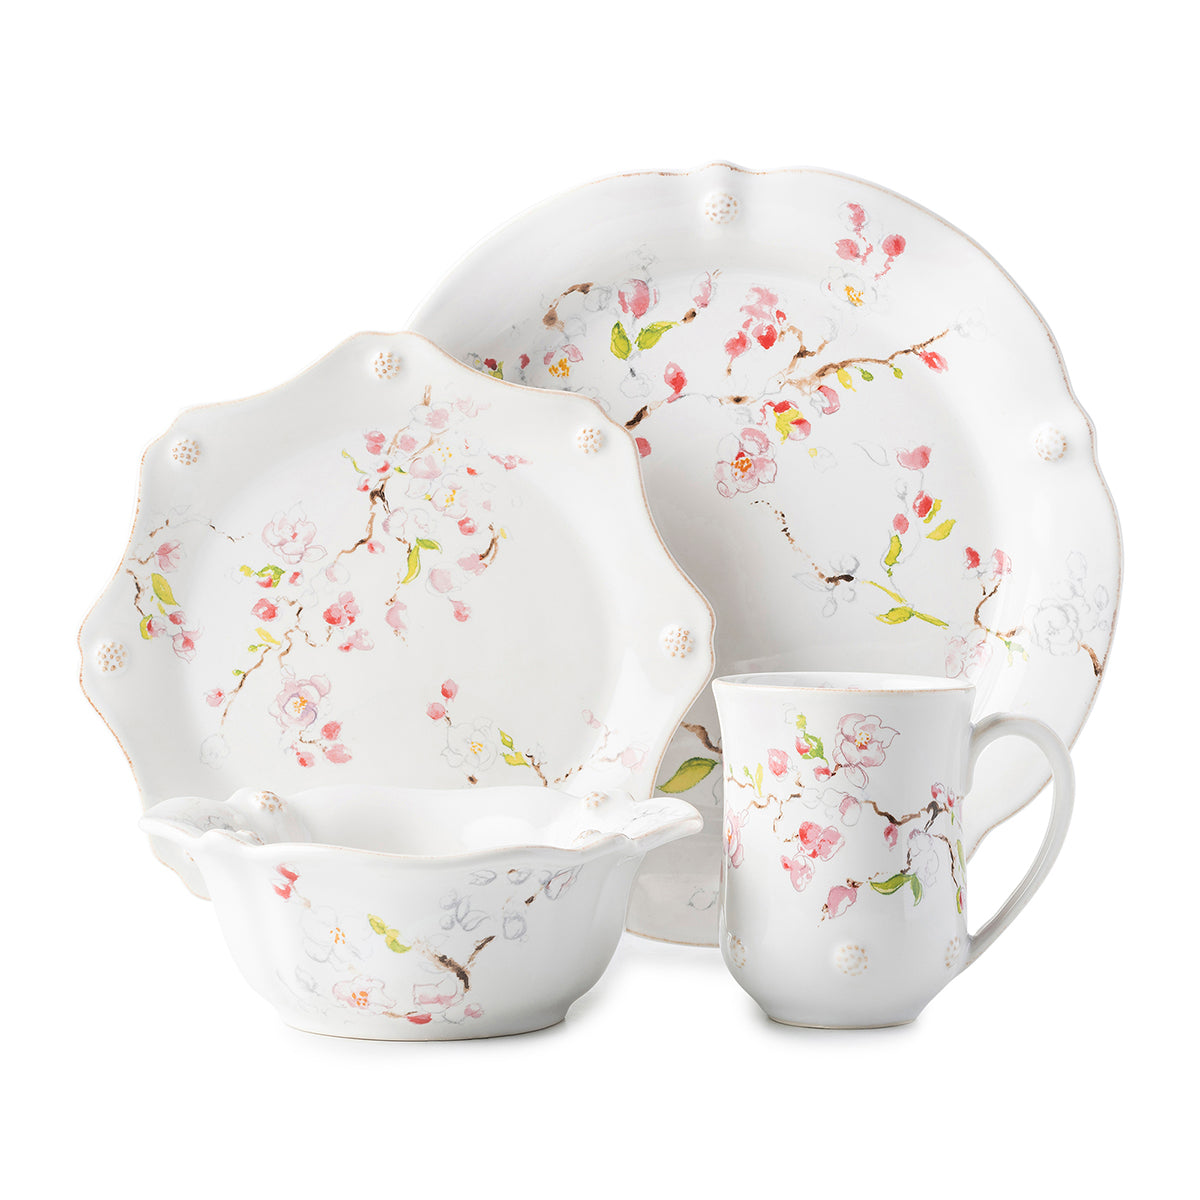 Berry & Thread Floral Sketch Cherry Blossom Place Setting, Set of 4